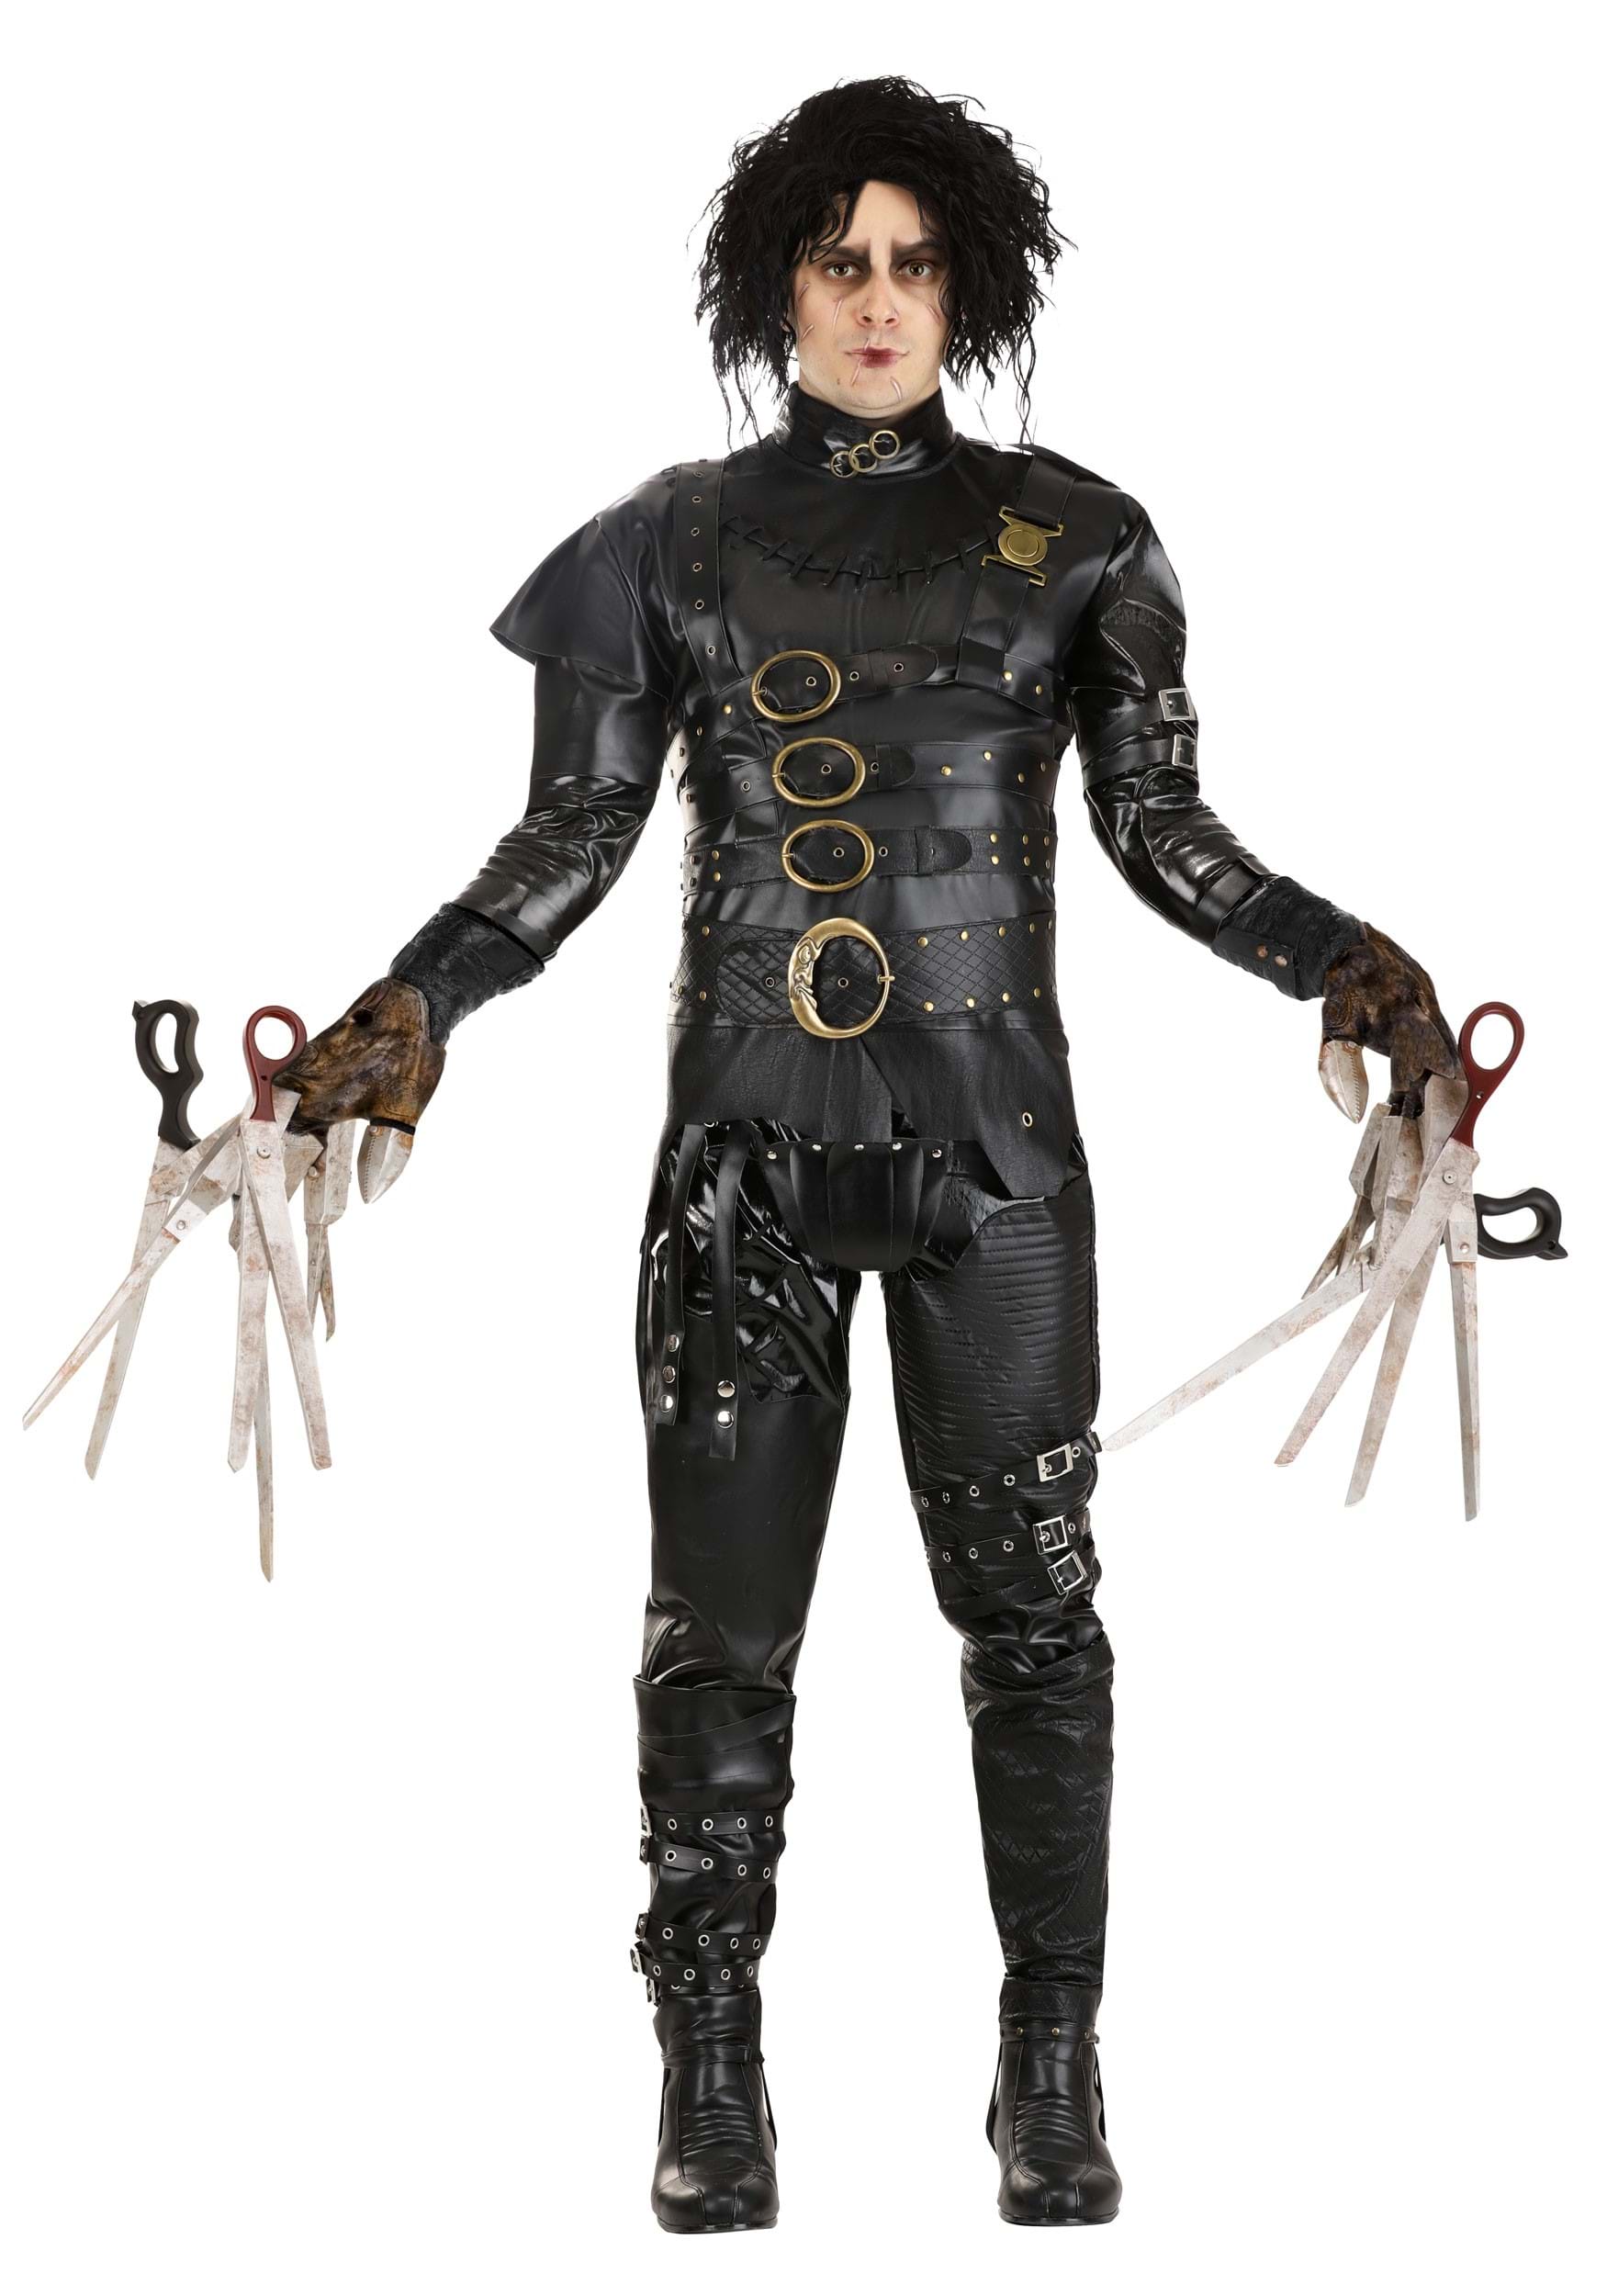 Image of Adult Authentic Edward Scissorhands Costume ID FUN3199AD-XL